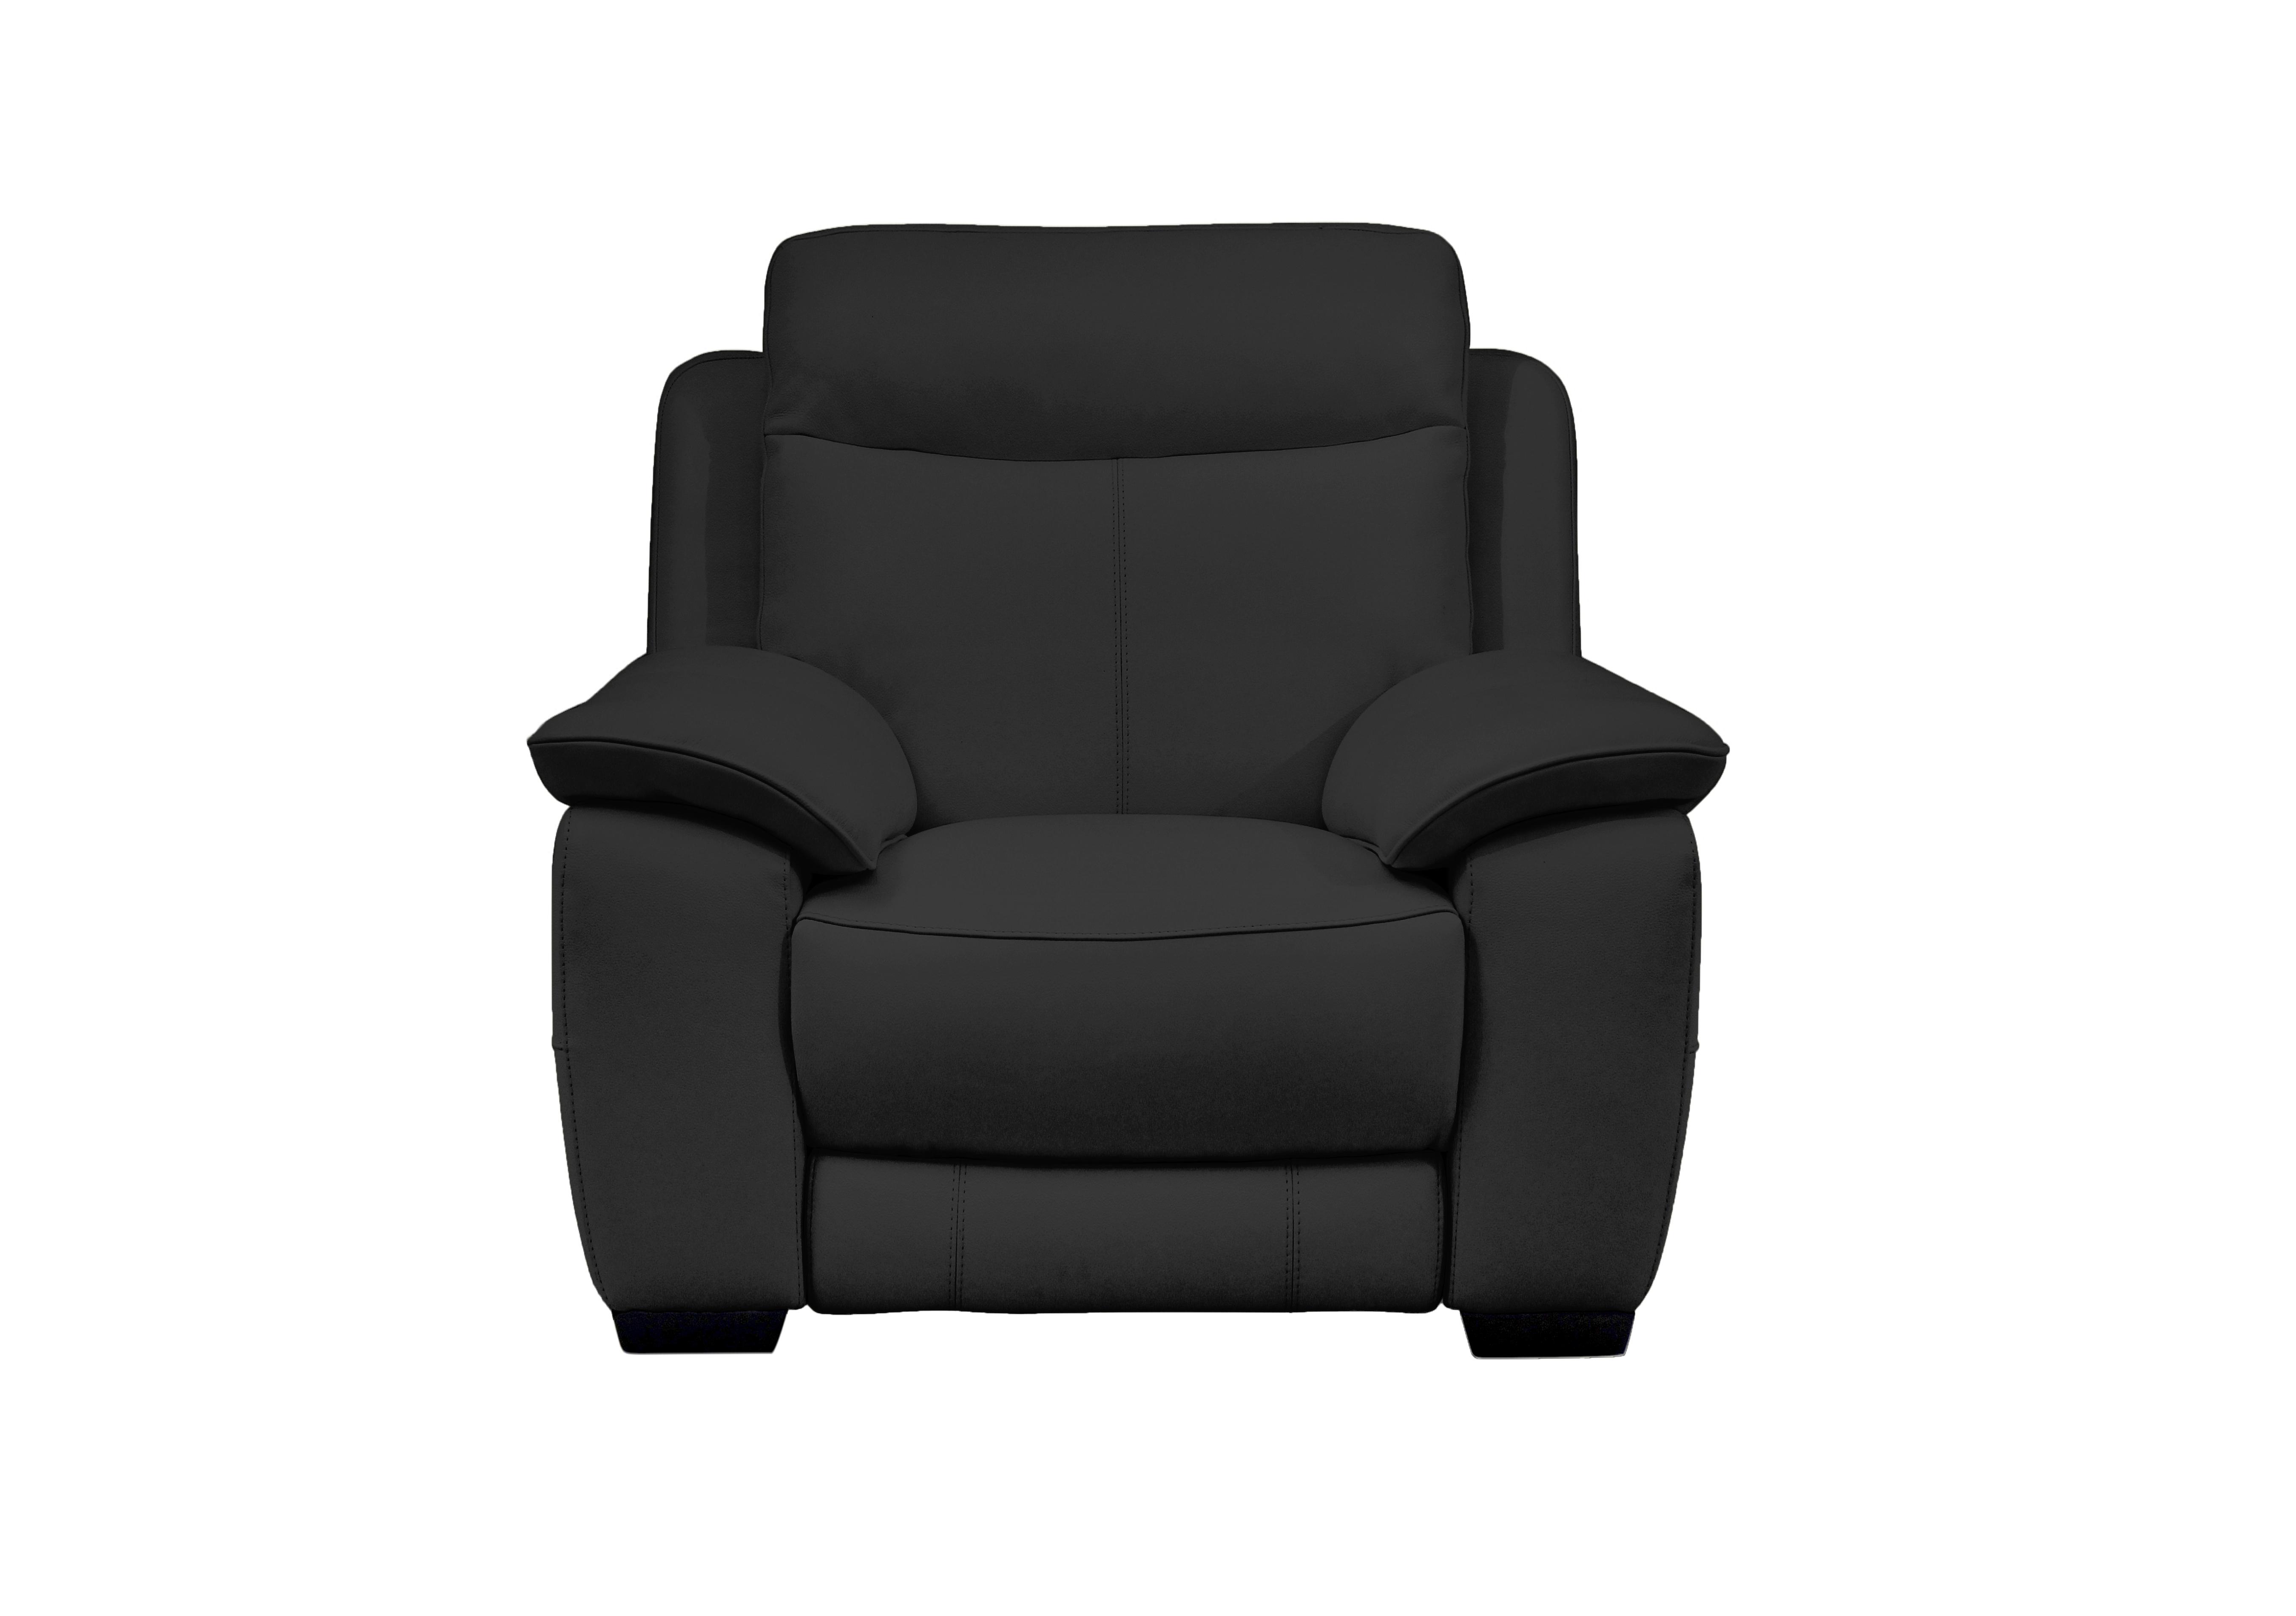 Starlight Express Leather Power Armchair with Power Headrest in Bv-3500 Classic Black on Furniture Village